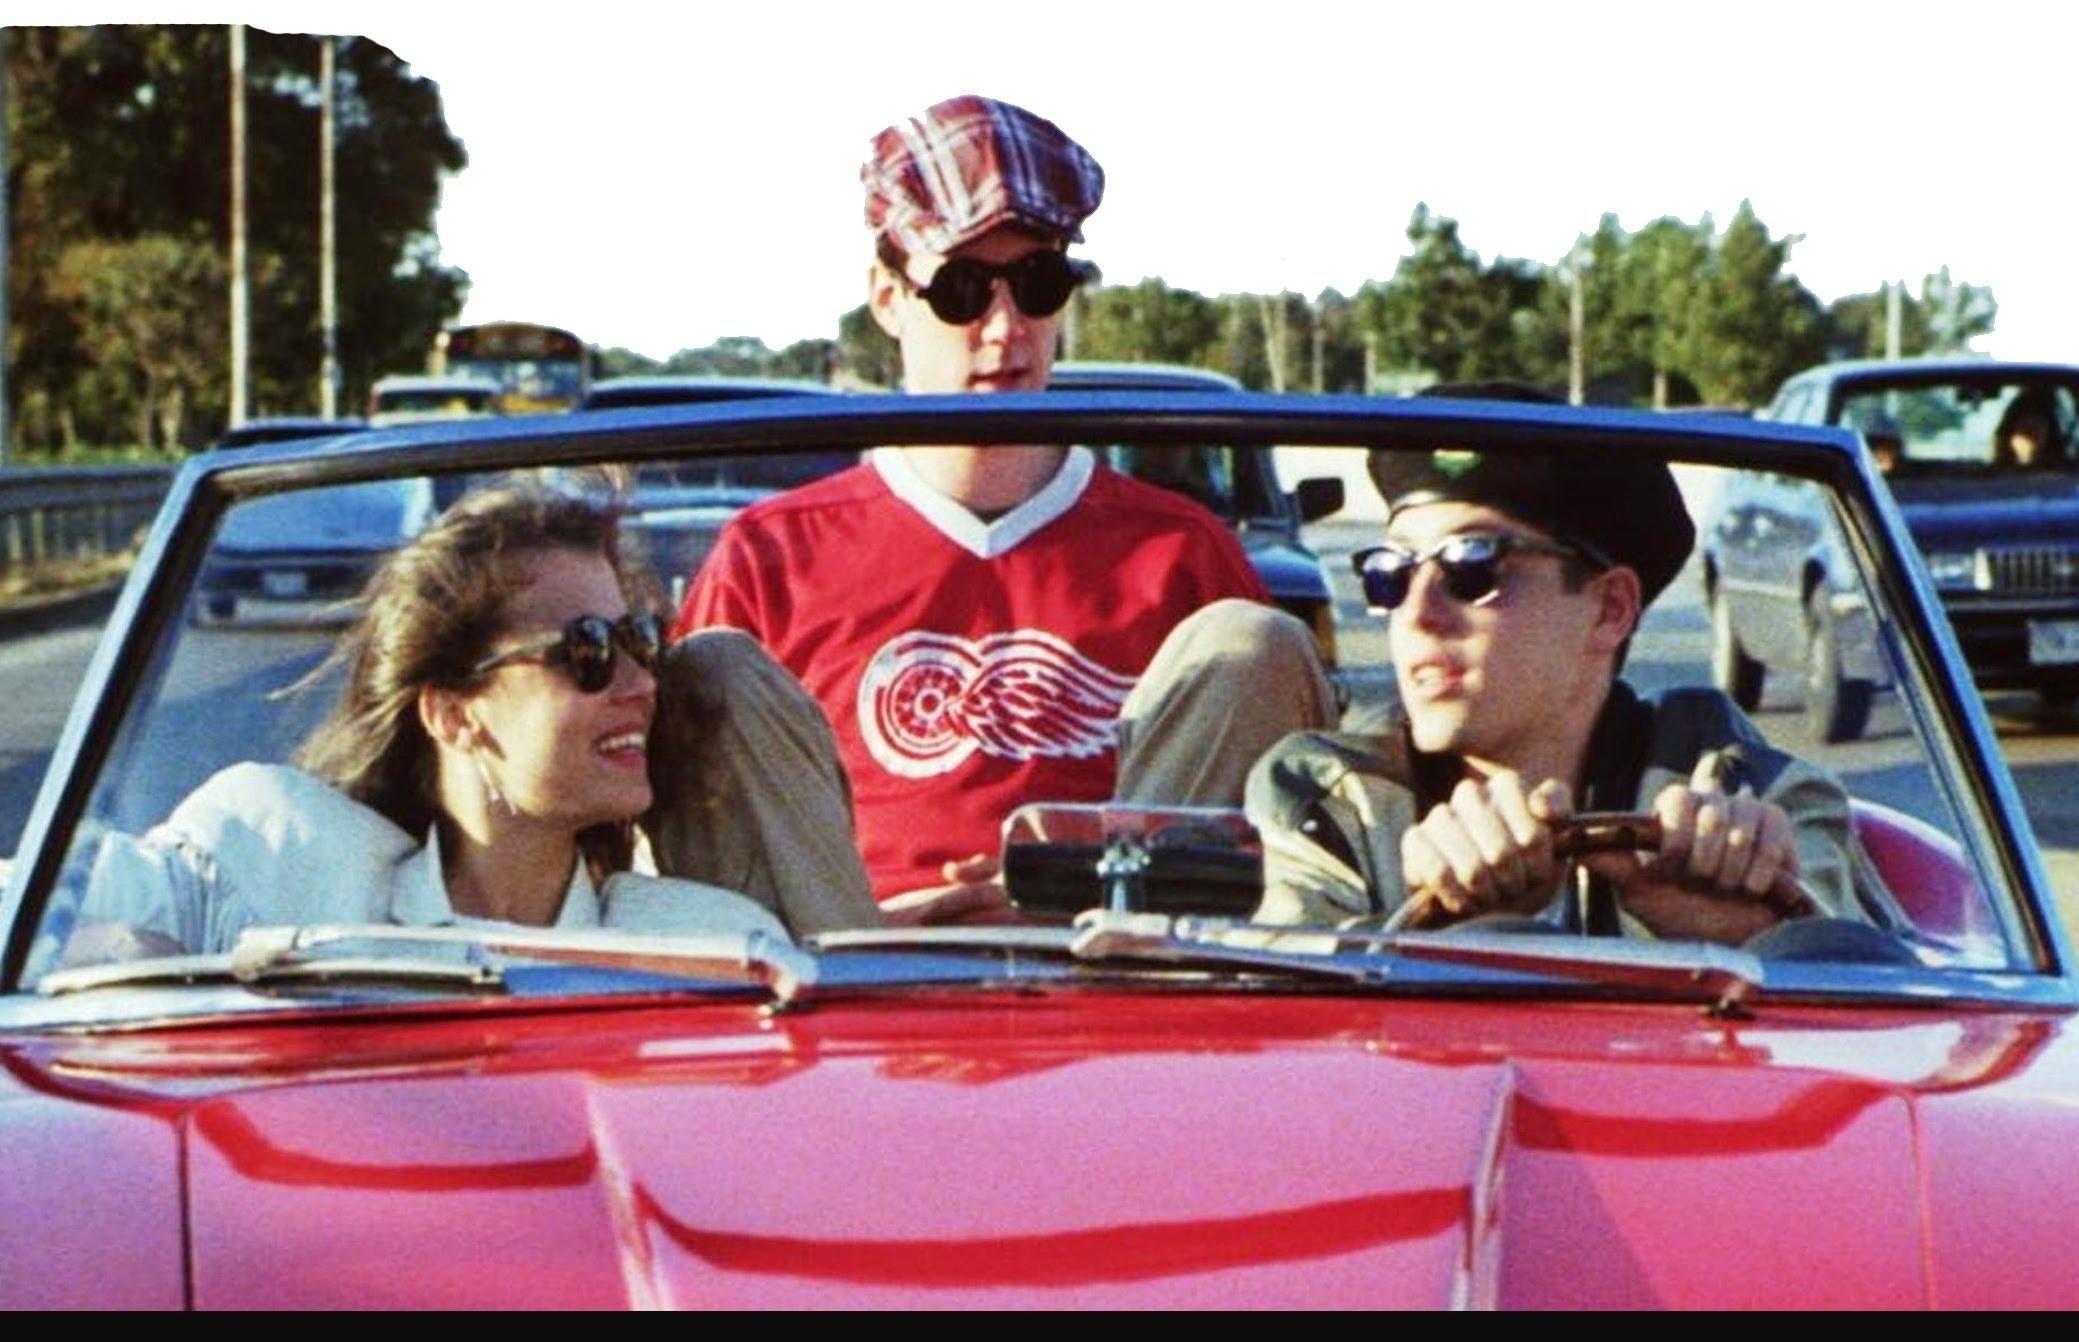 Ferris Bueller’s Day Off wallpapers, Movie, HQ Ferris Bueller’s Day